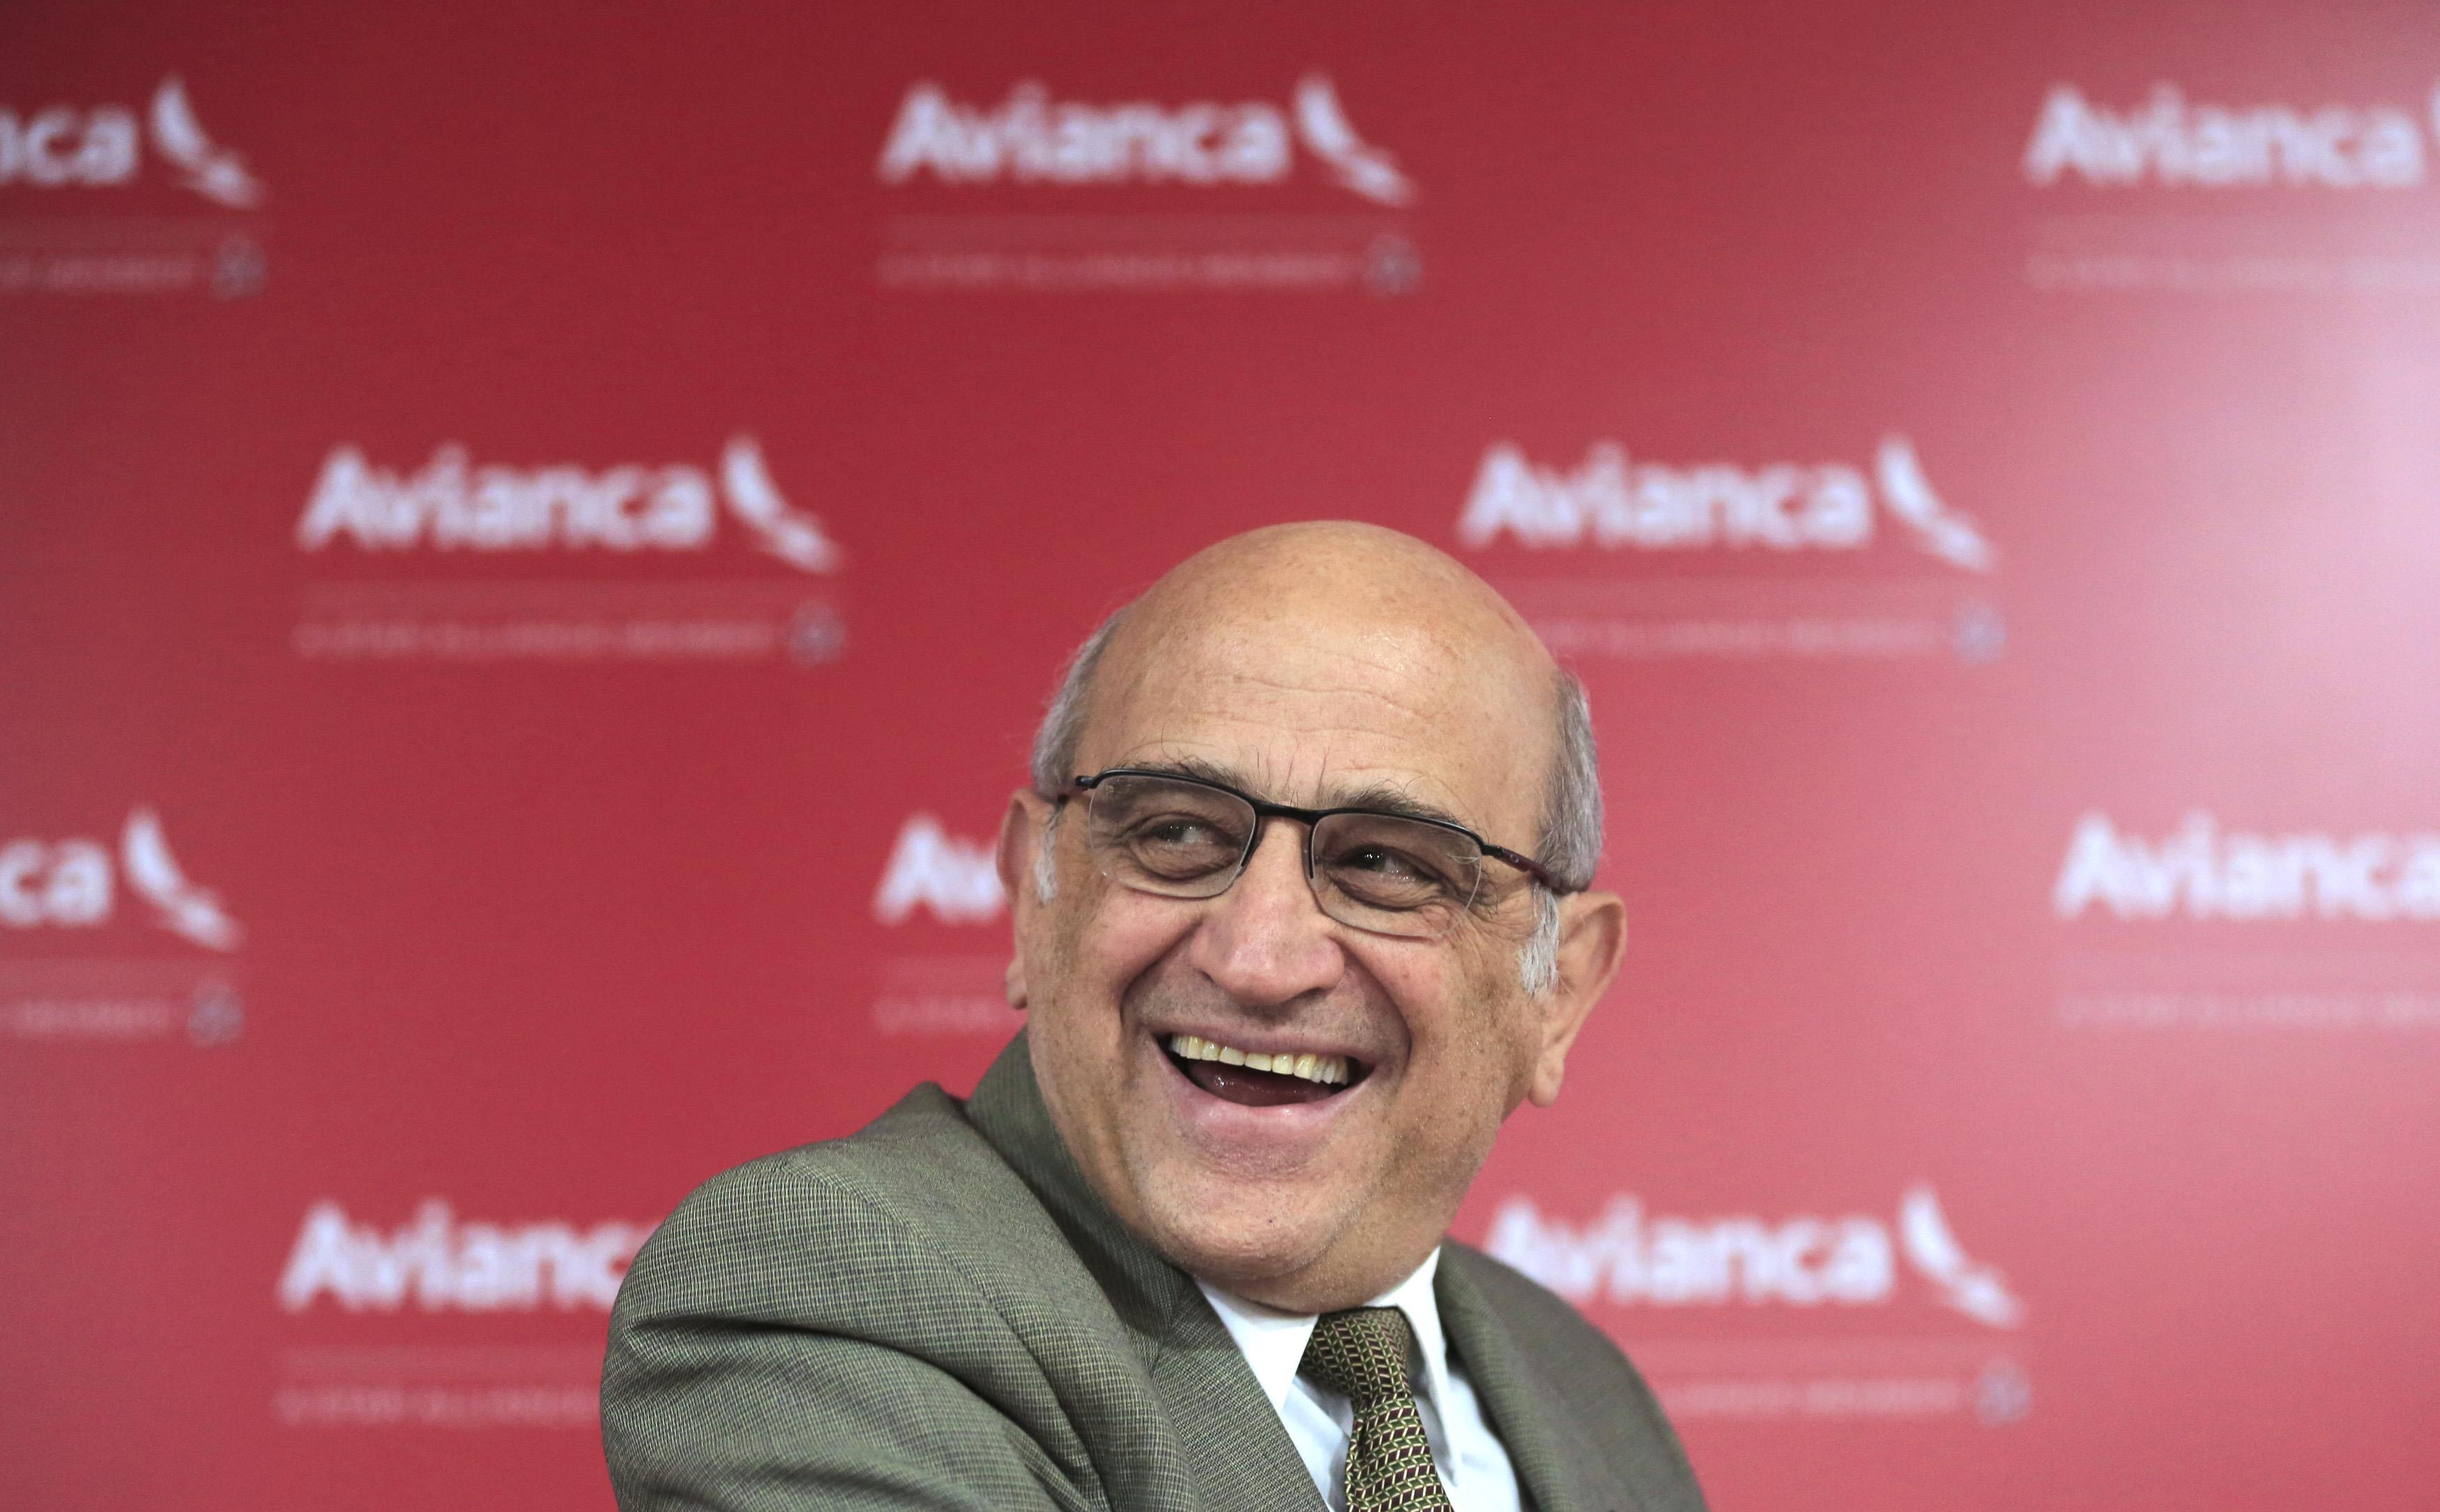 Avianca airline owner Efromovich laughs as Villegas, president of Avianca company, speaks to reporte